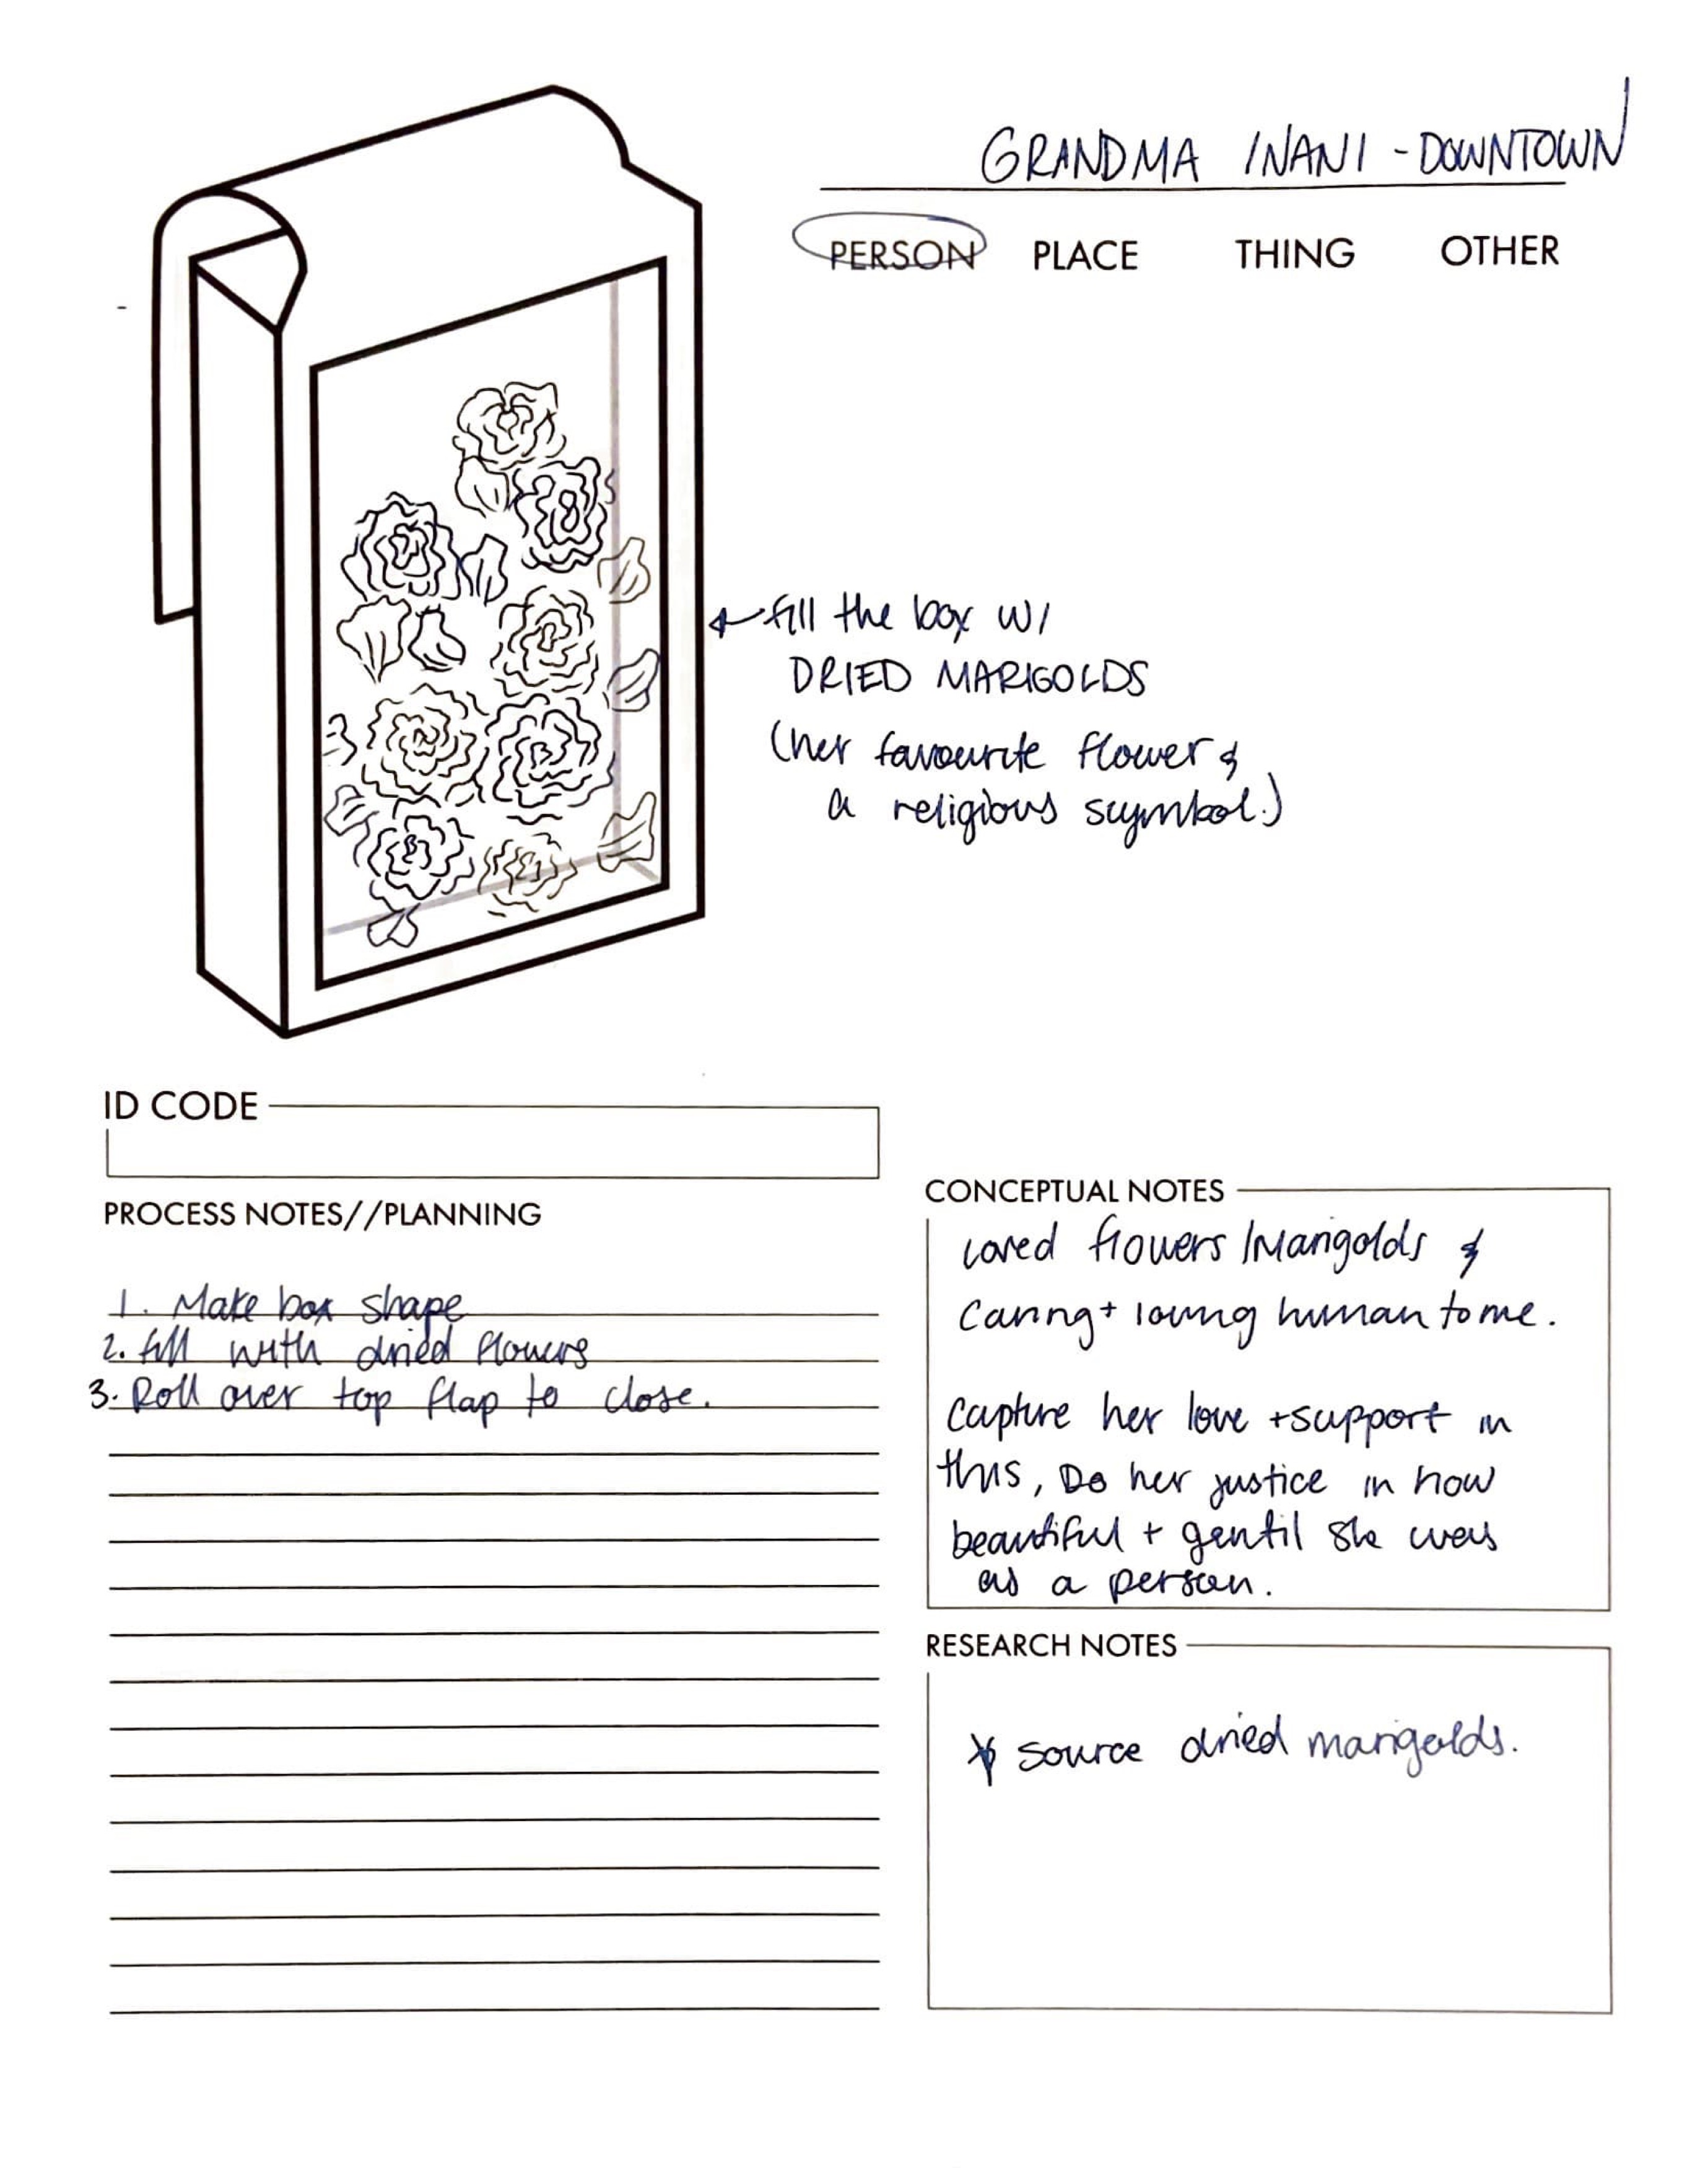 Tangled Roots (Ideation Pages)